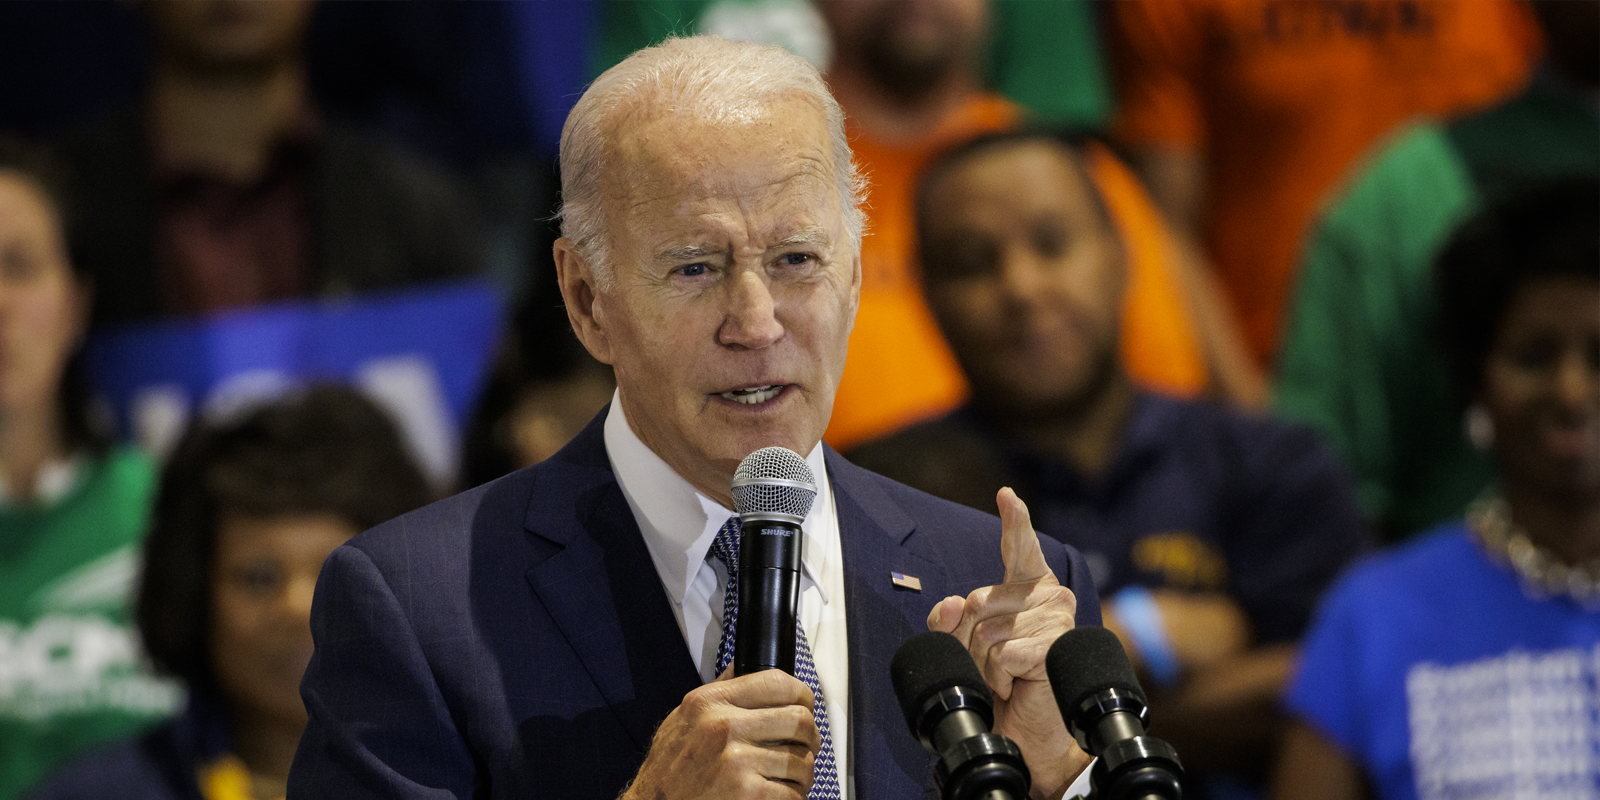 Labor unions, including AFSCME, rally for Biden at NEA